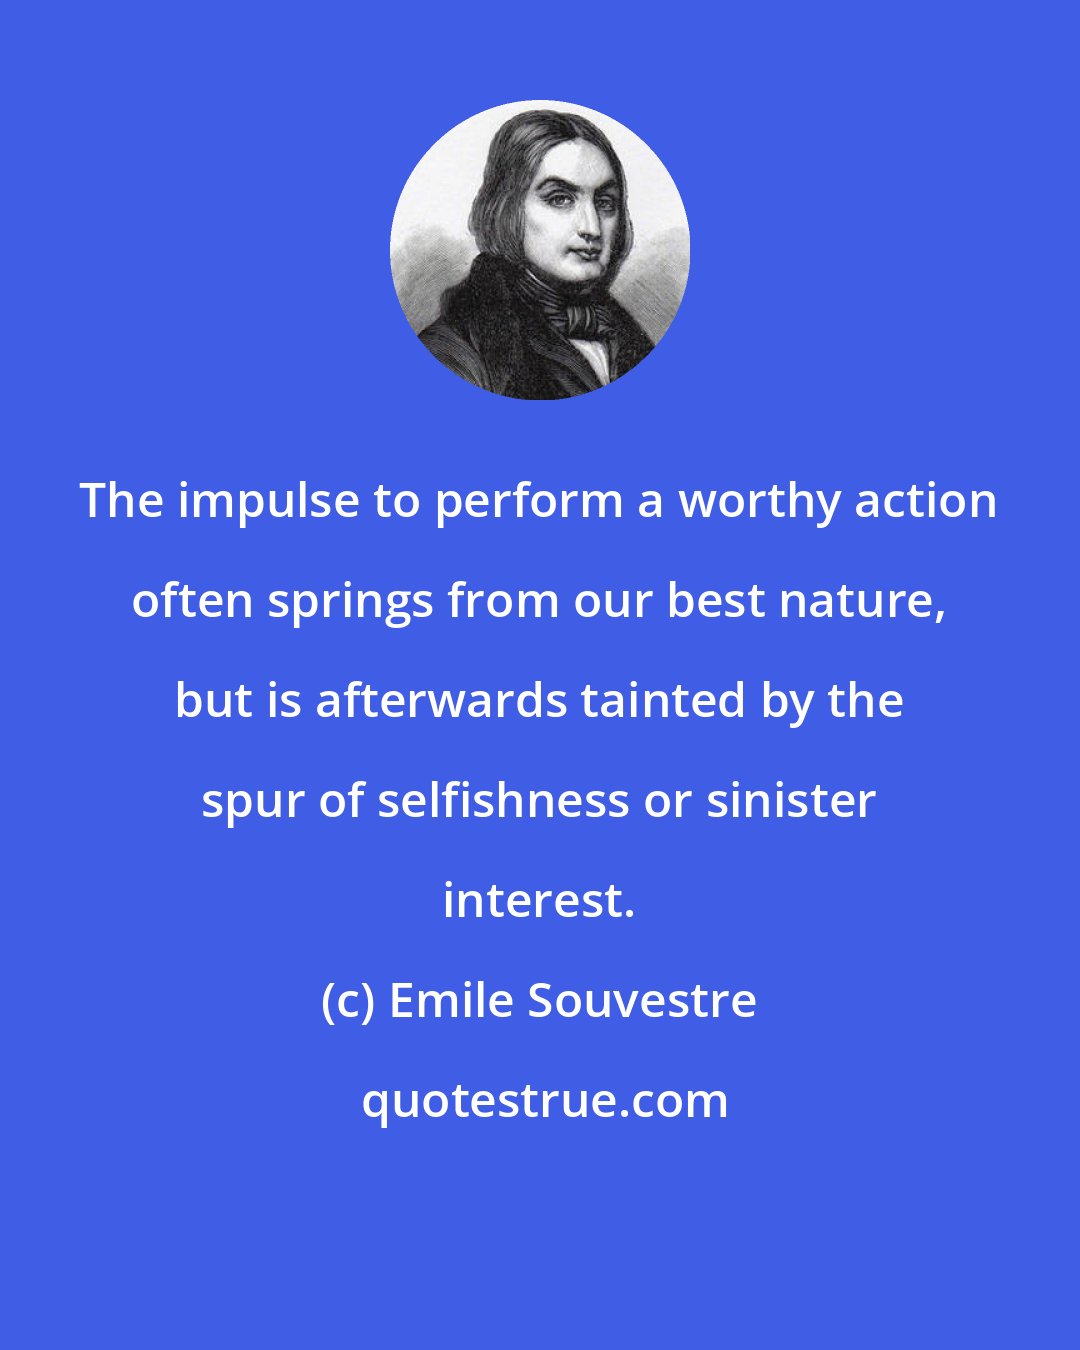 Emile Souvestre: The impulse to perform a worthy action often springs from our best nature, but is afterwards tainted by the spur of selfishness or sinister interest.